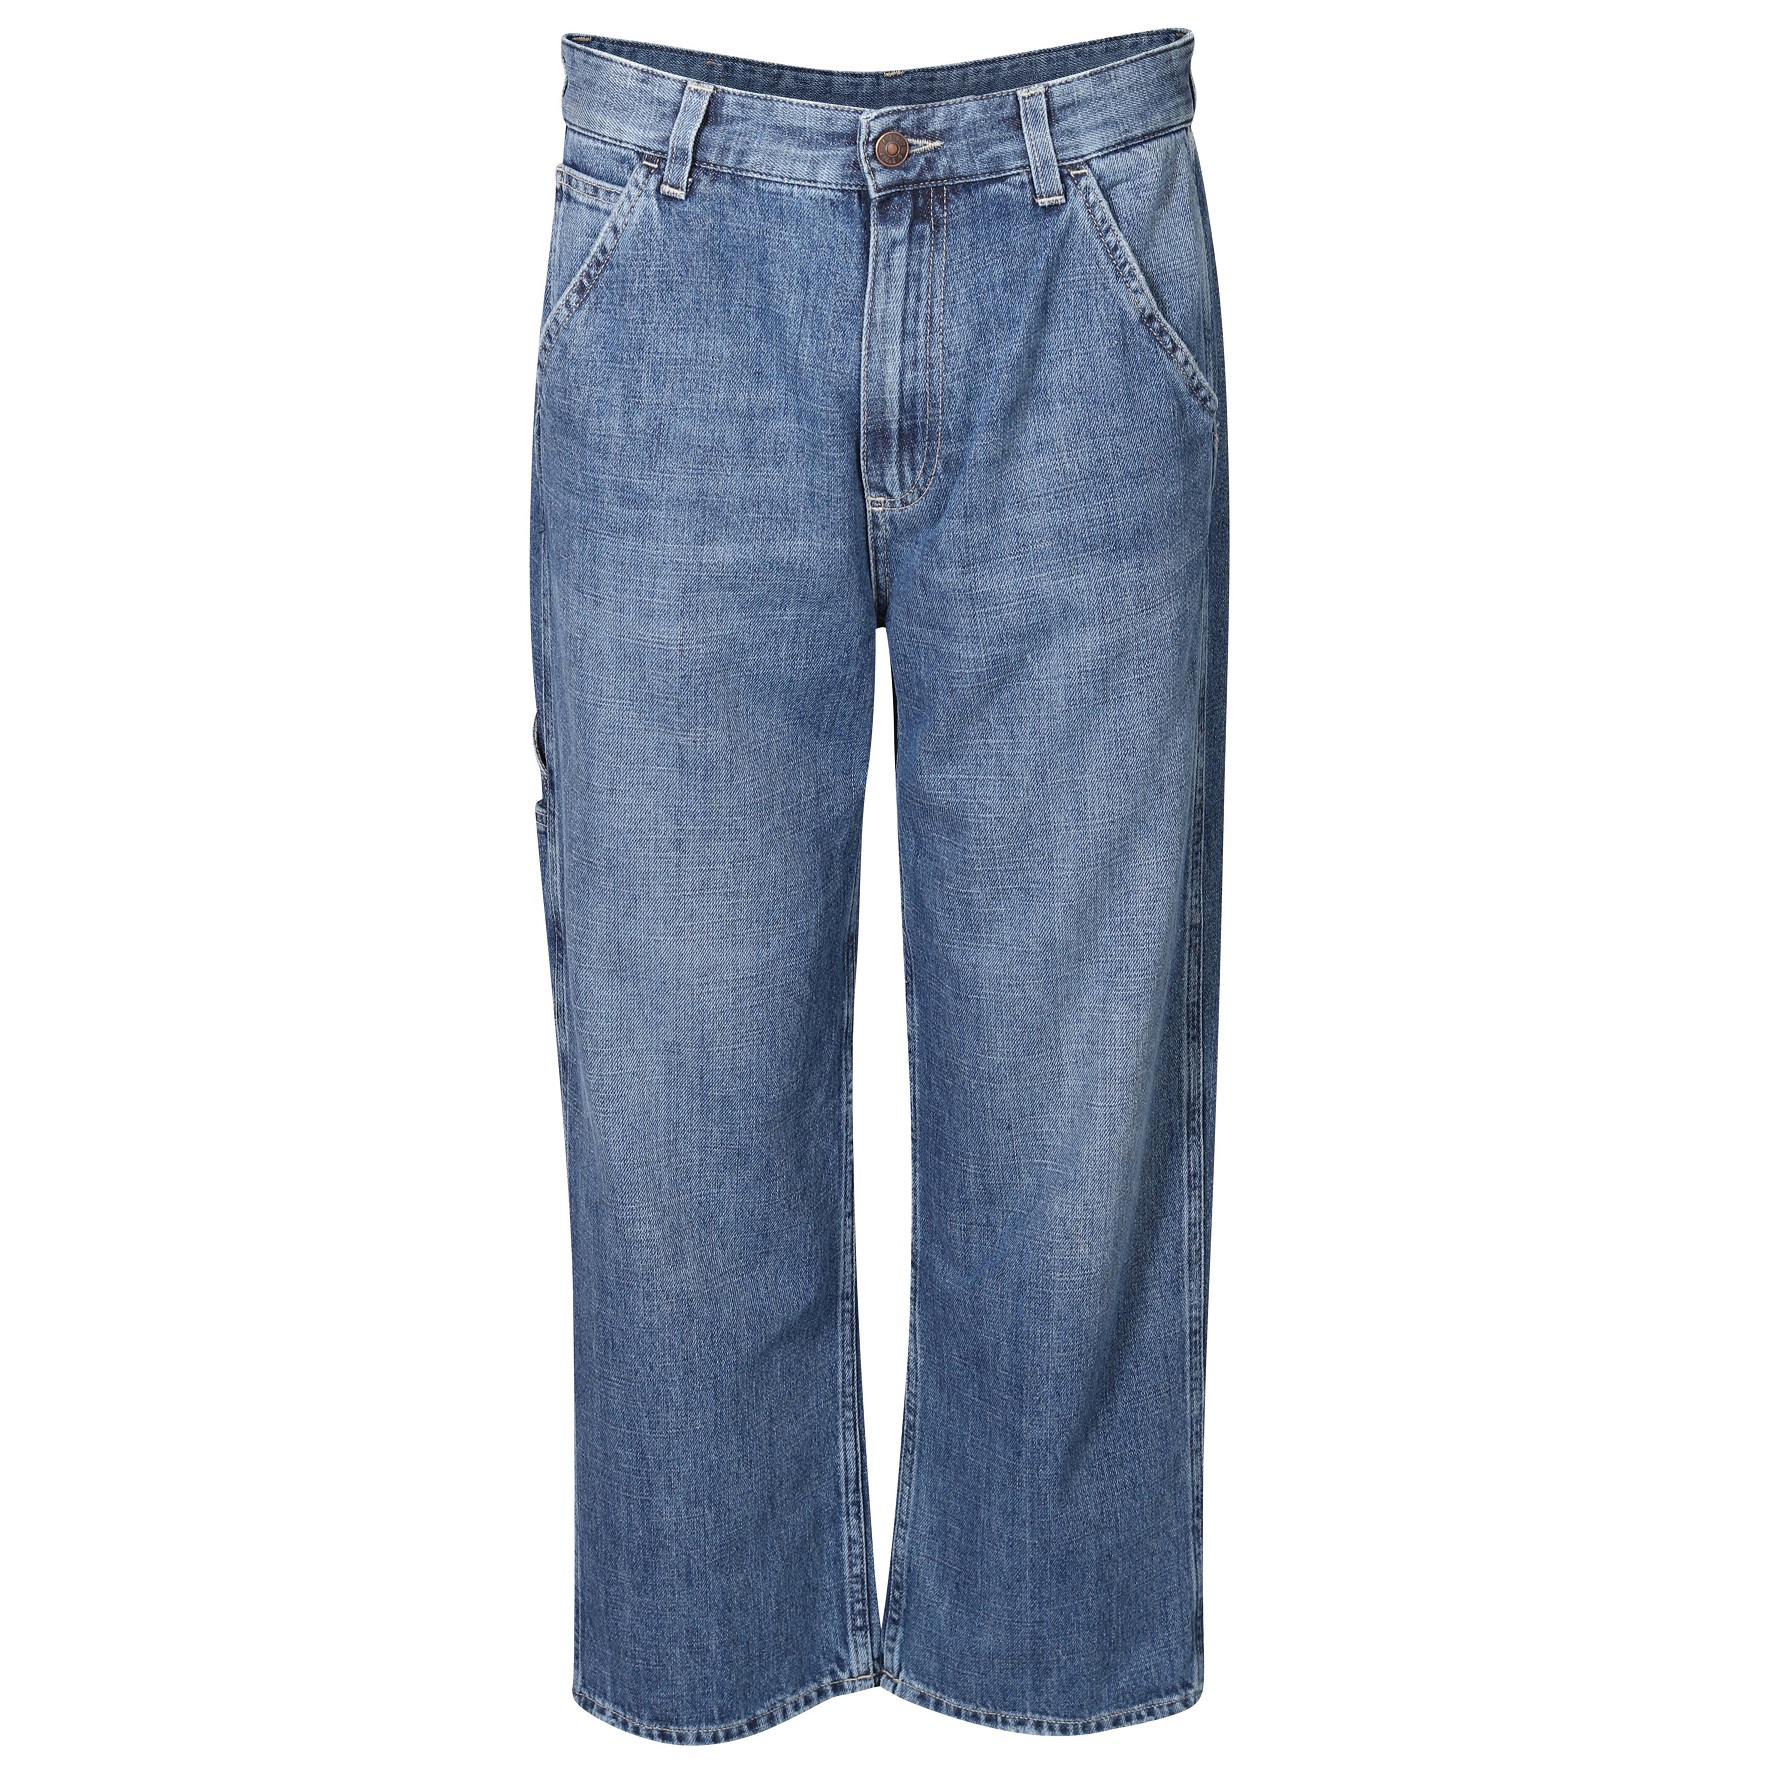 6397 The Painter Jeans in Worn Blue